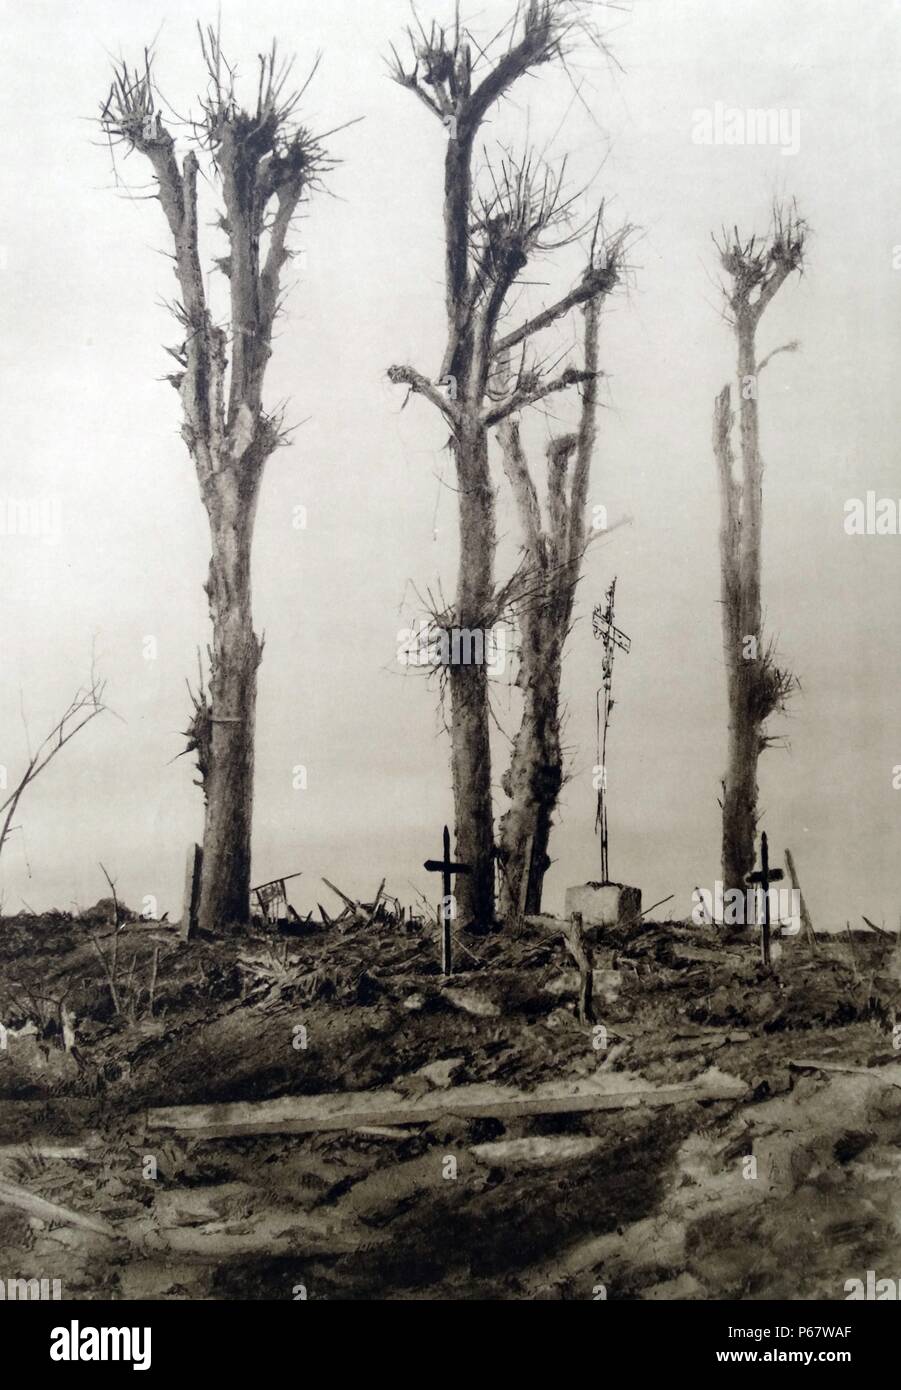 Temporary war graves at a French battlefield of World War One Stock Photo